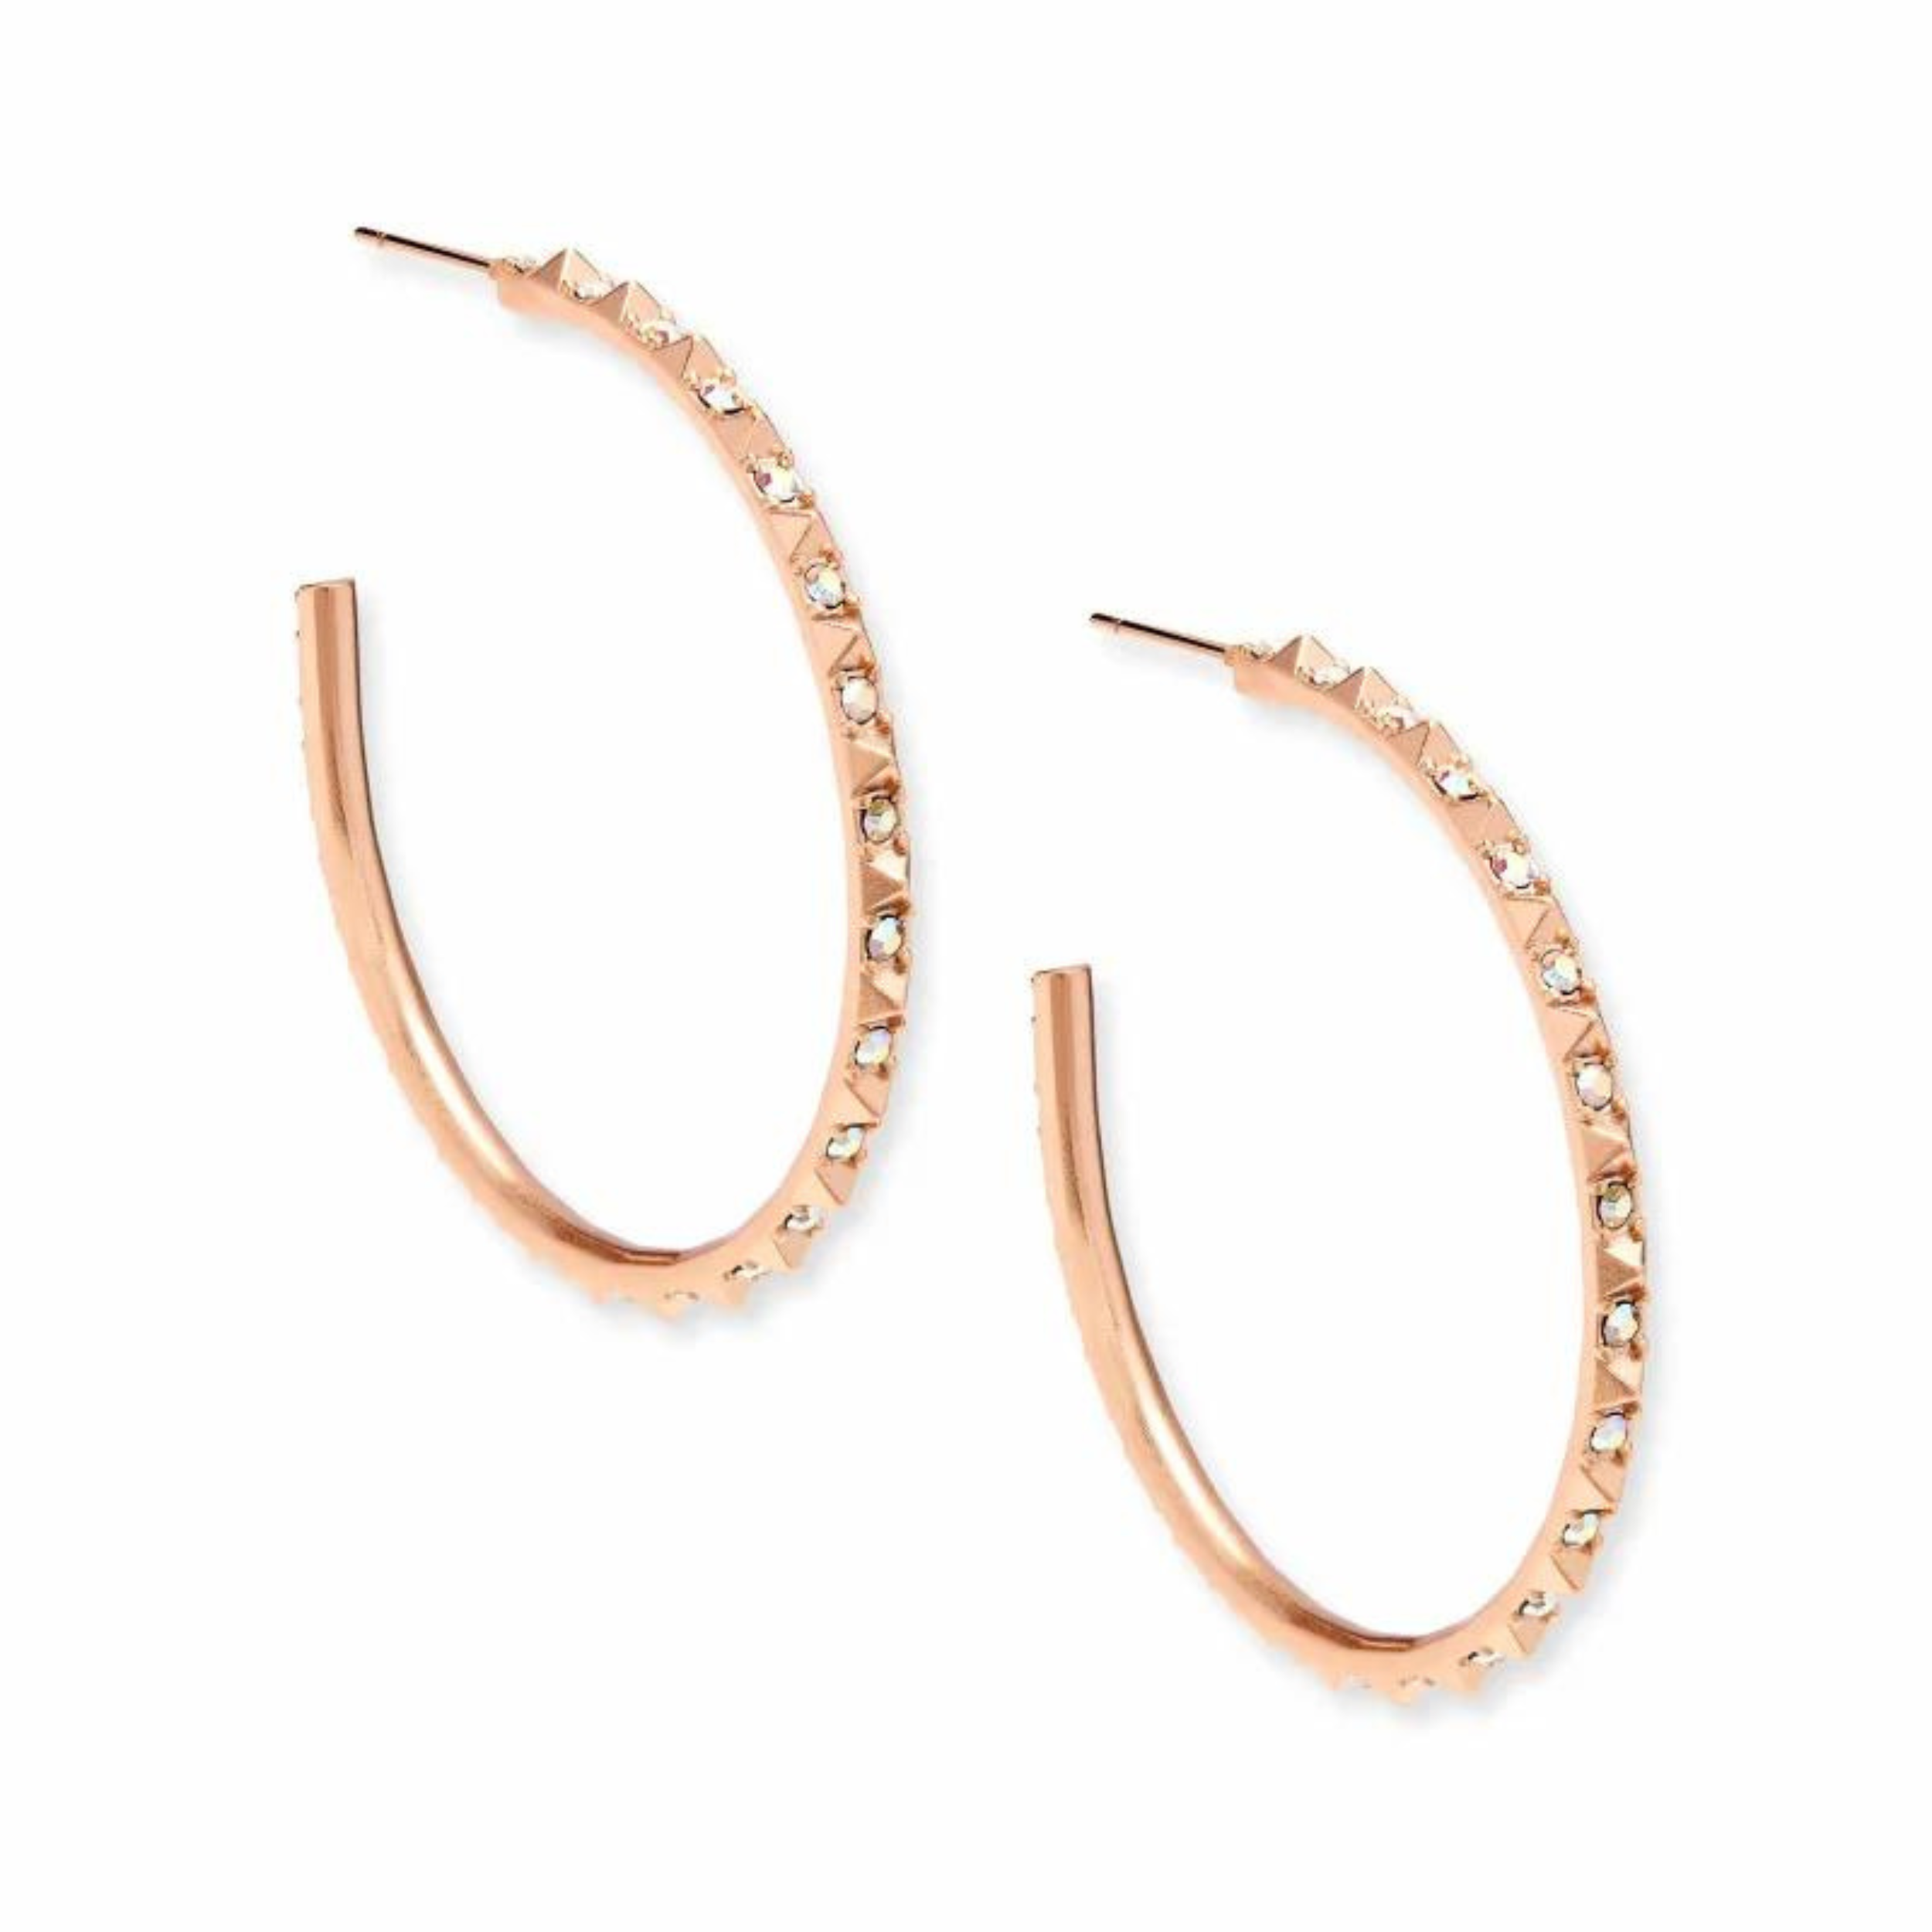 Rose gold hoop earrings with iridescent crystals, pictured on a white background.